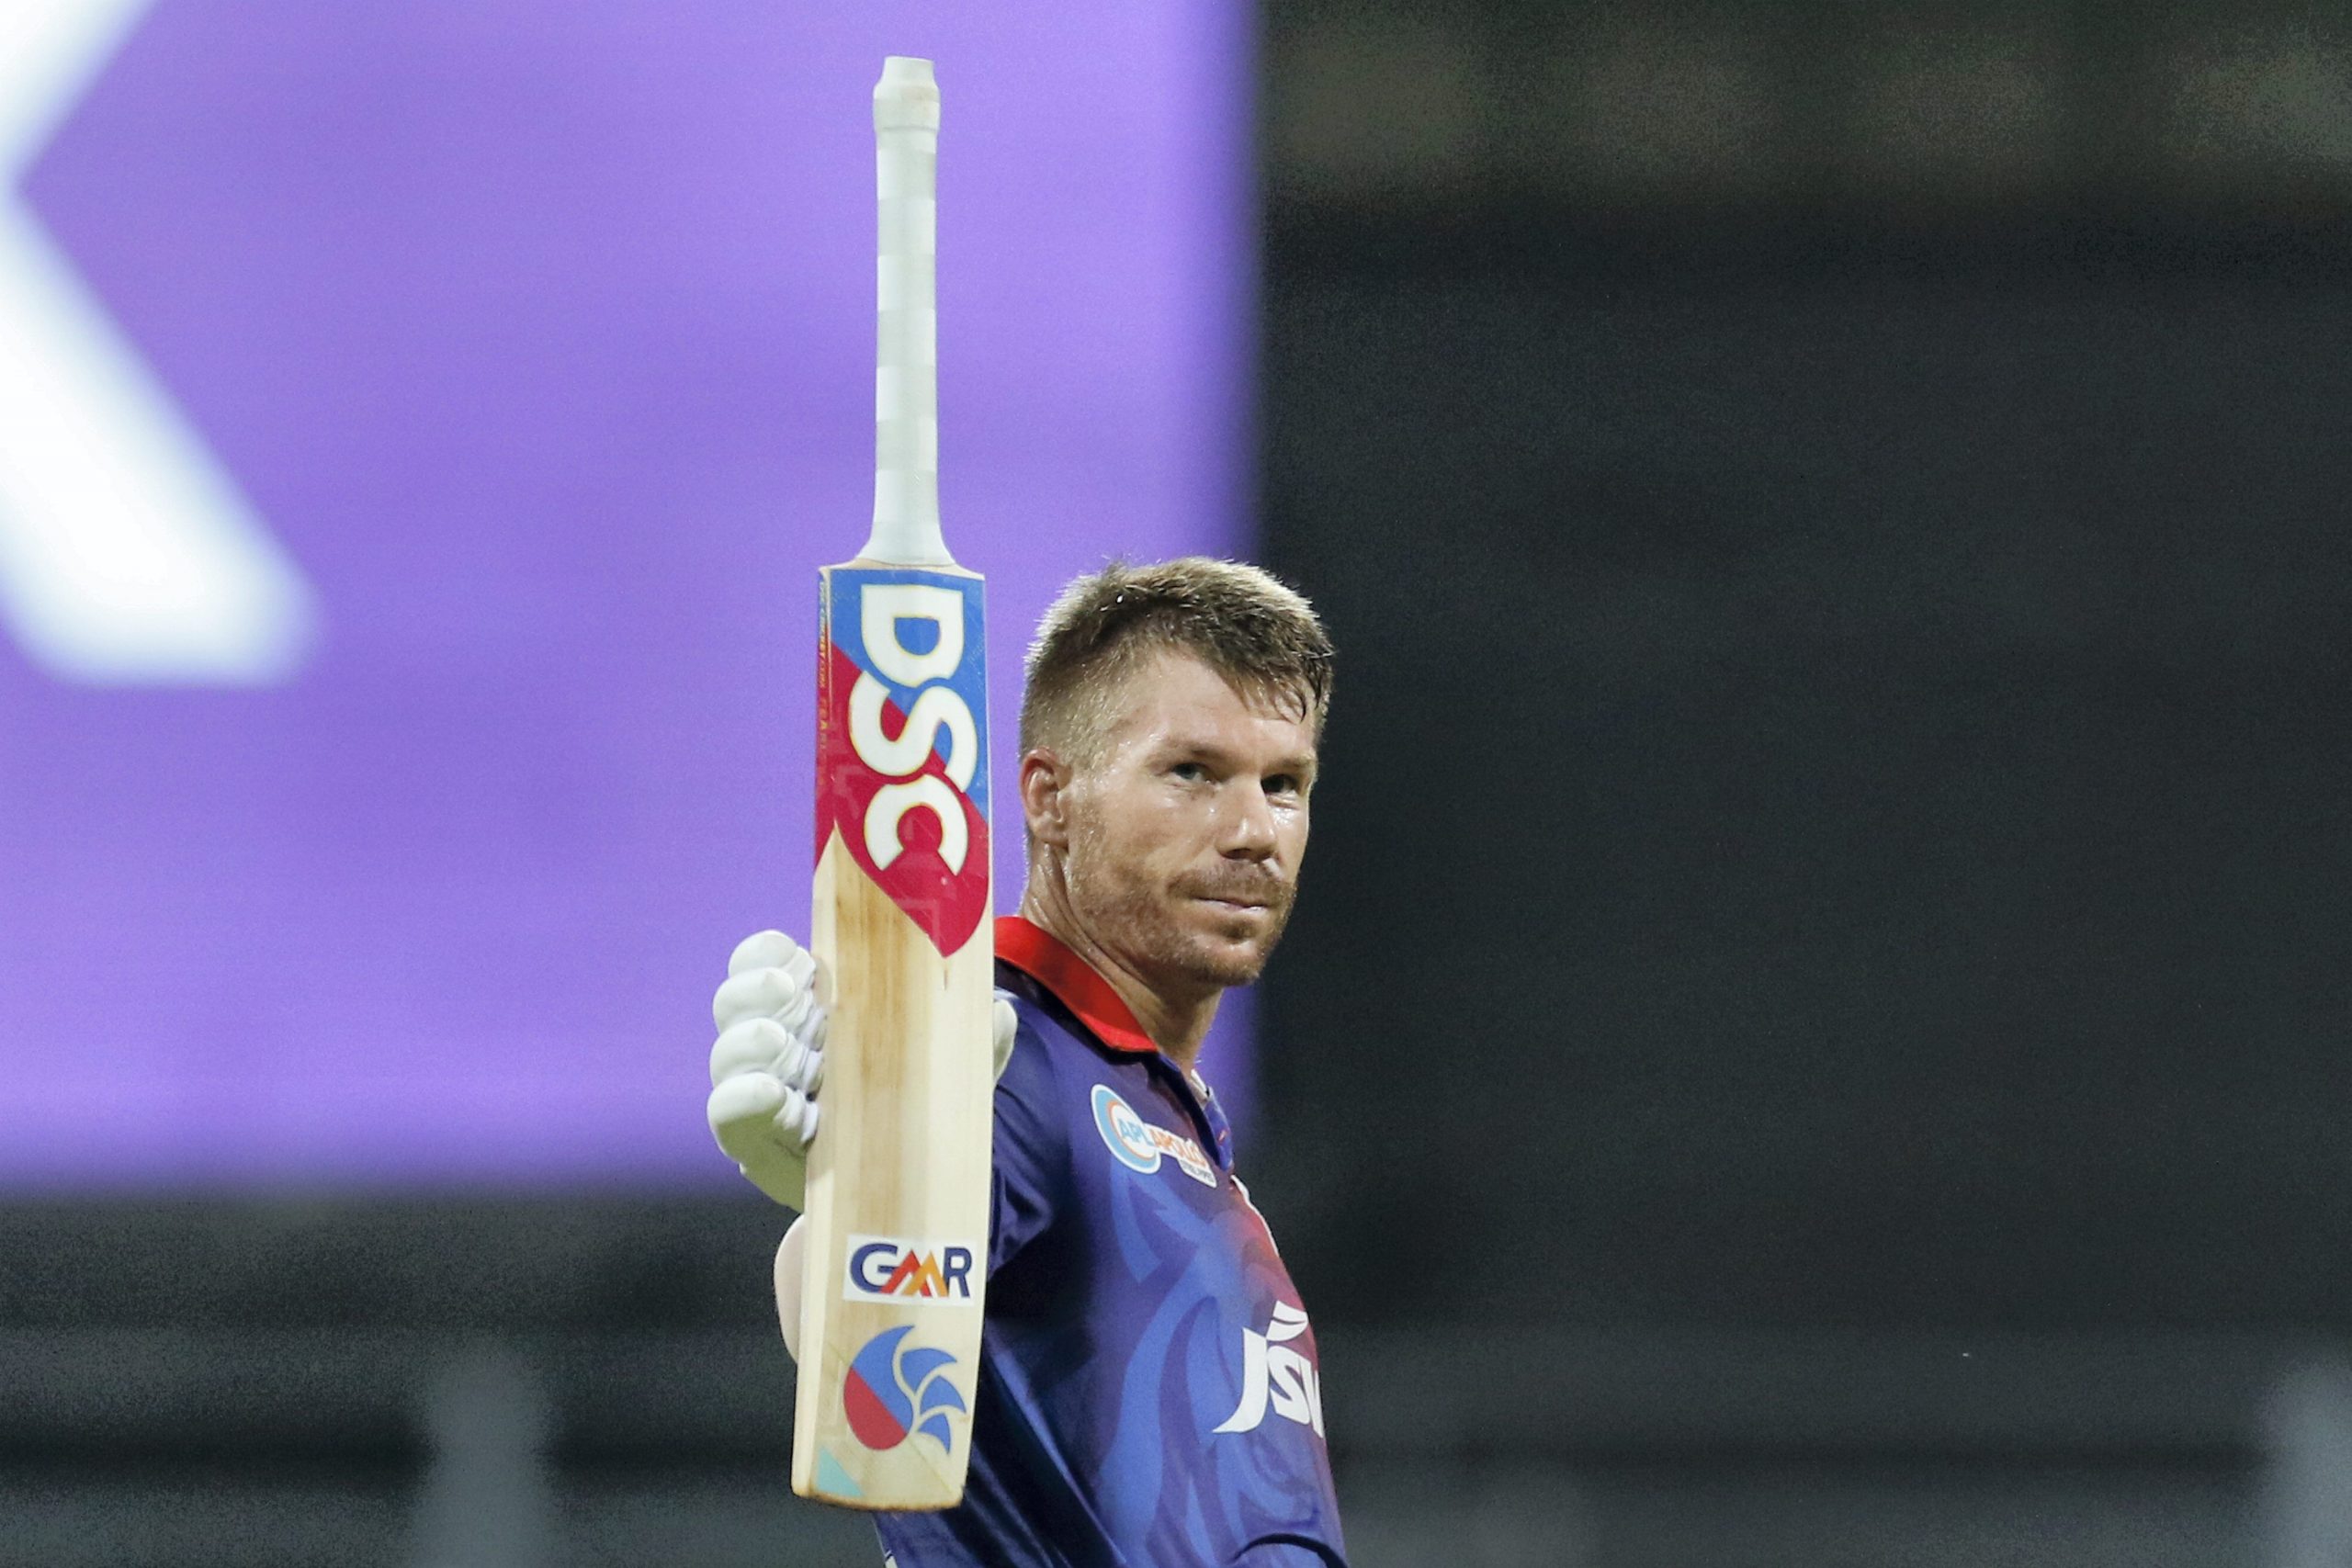 David Warner scores 89th fifty in T20s, pips Chris Gayle